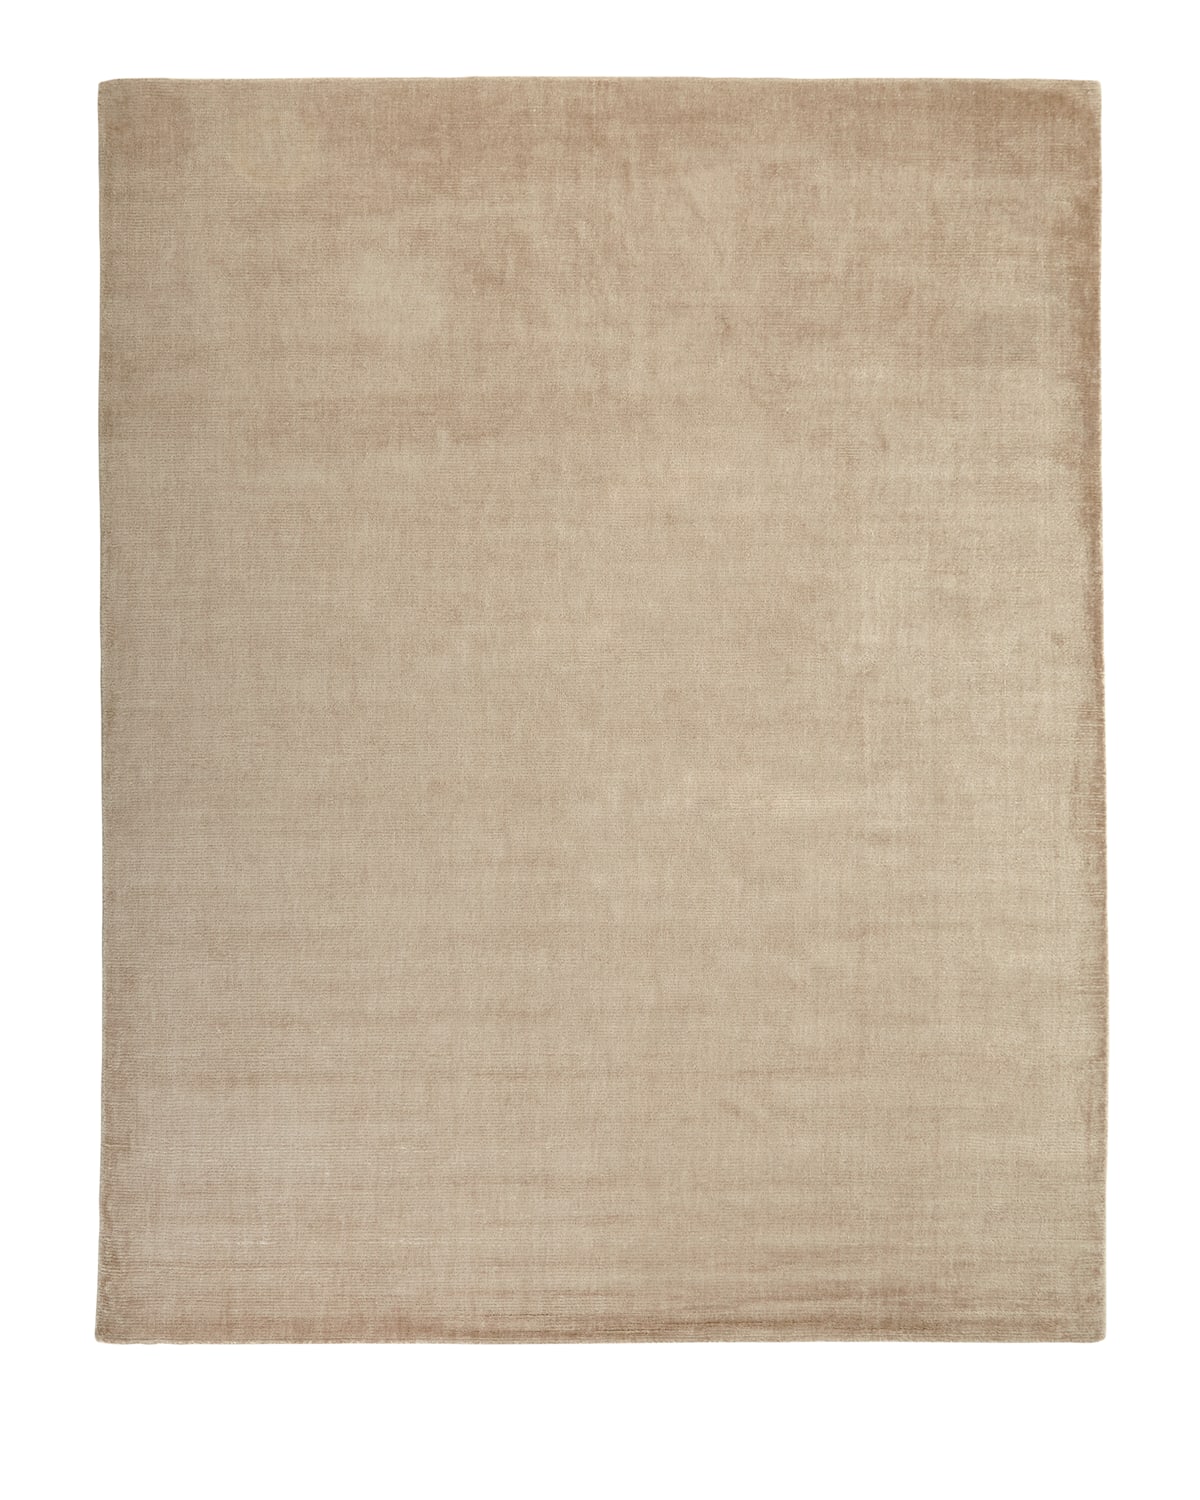 Exquisite Rugs Rockingham Hand-loomed Rug, 12' X 15' In Neutral